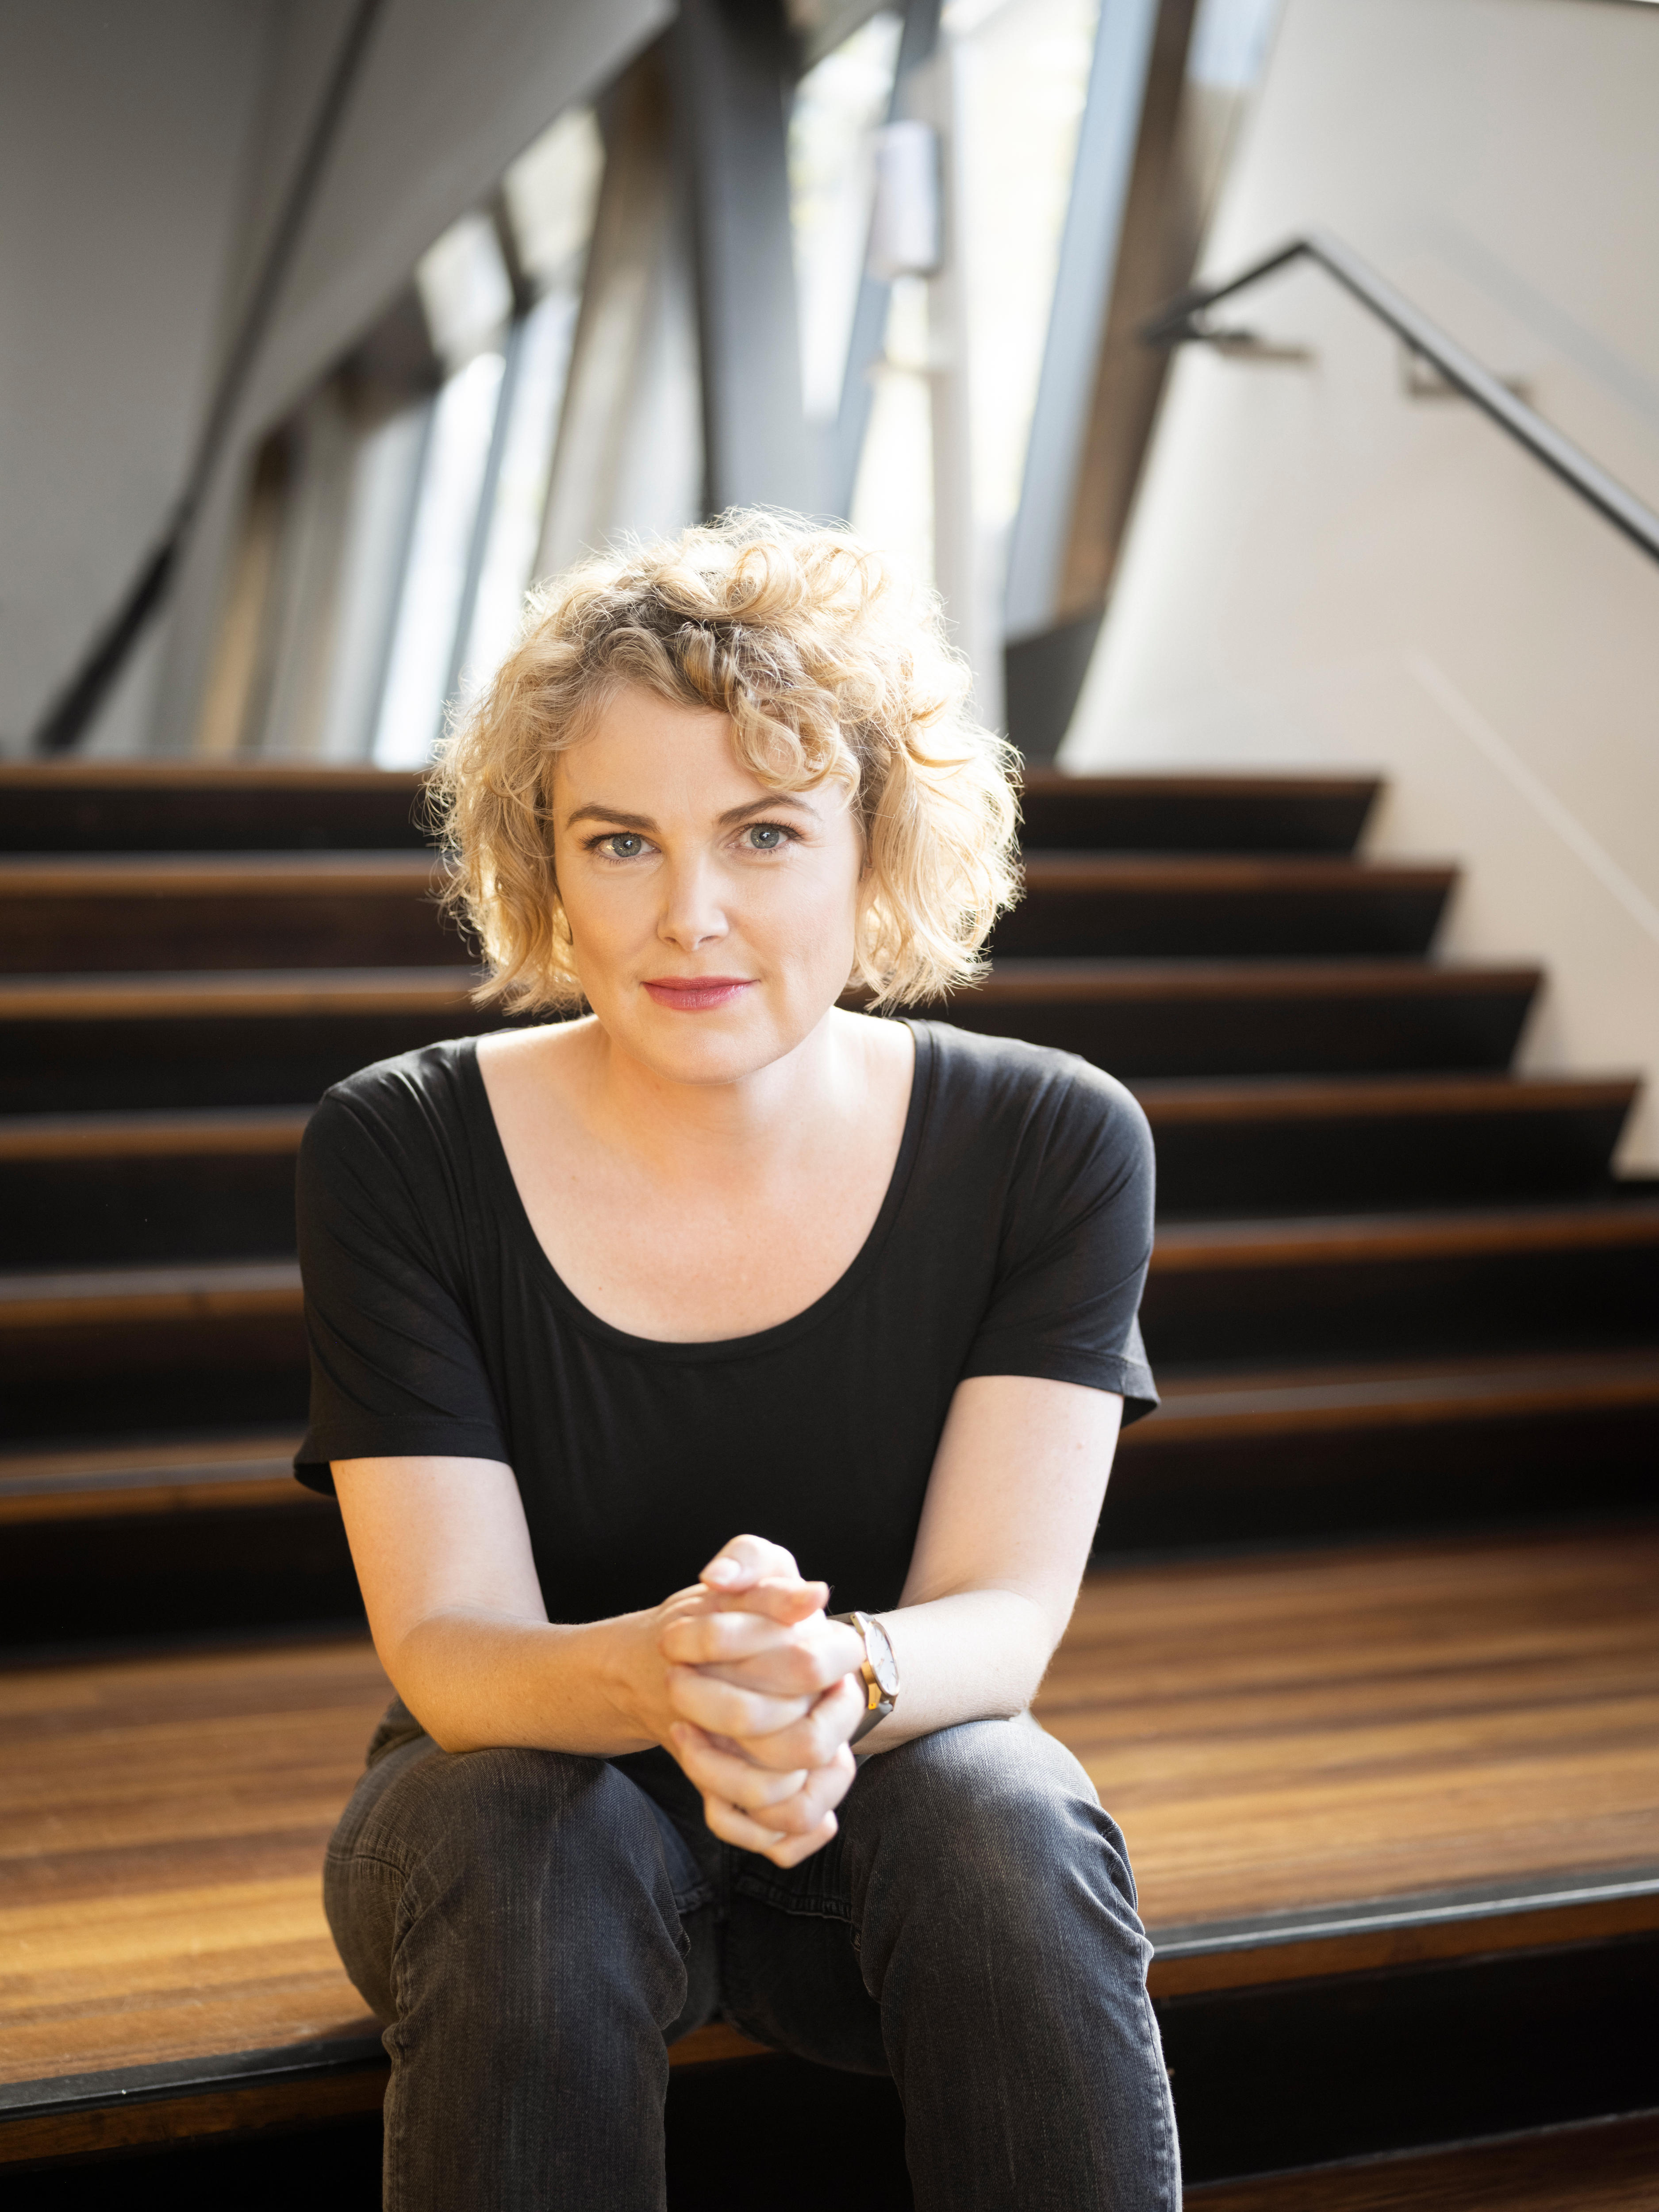 A blonde, curly-haired woman, wearing a black shirt, sits on theatre foyer stairs, hand clasped, with a slight smile on her face